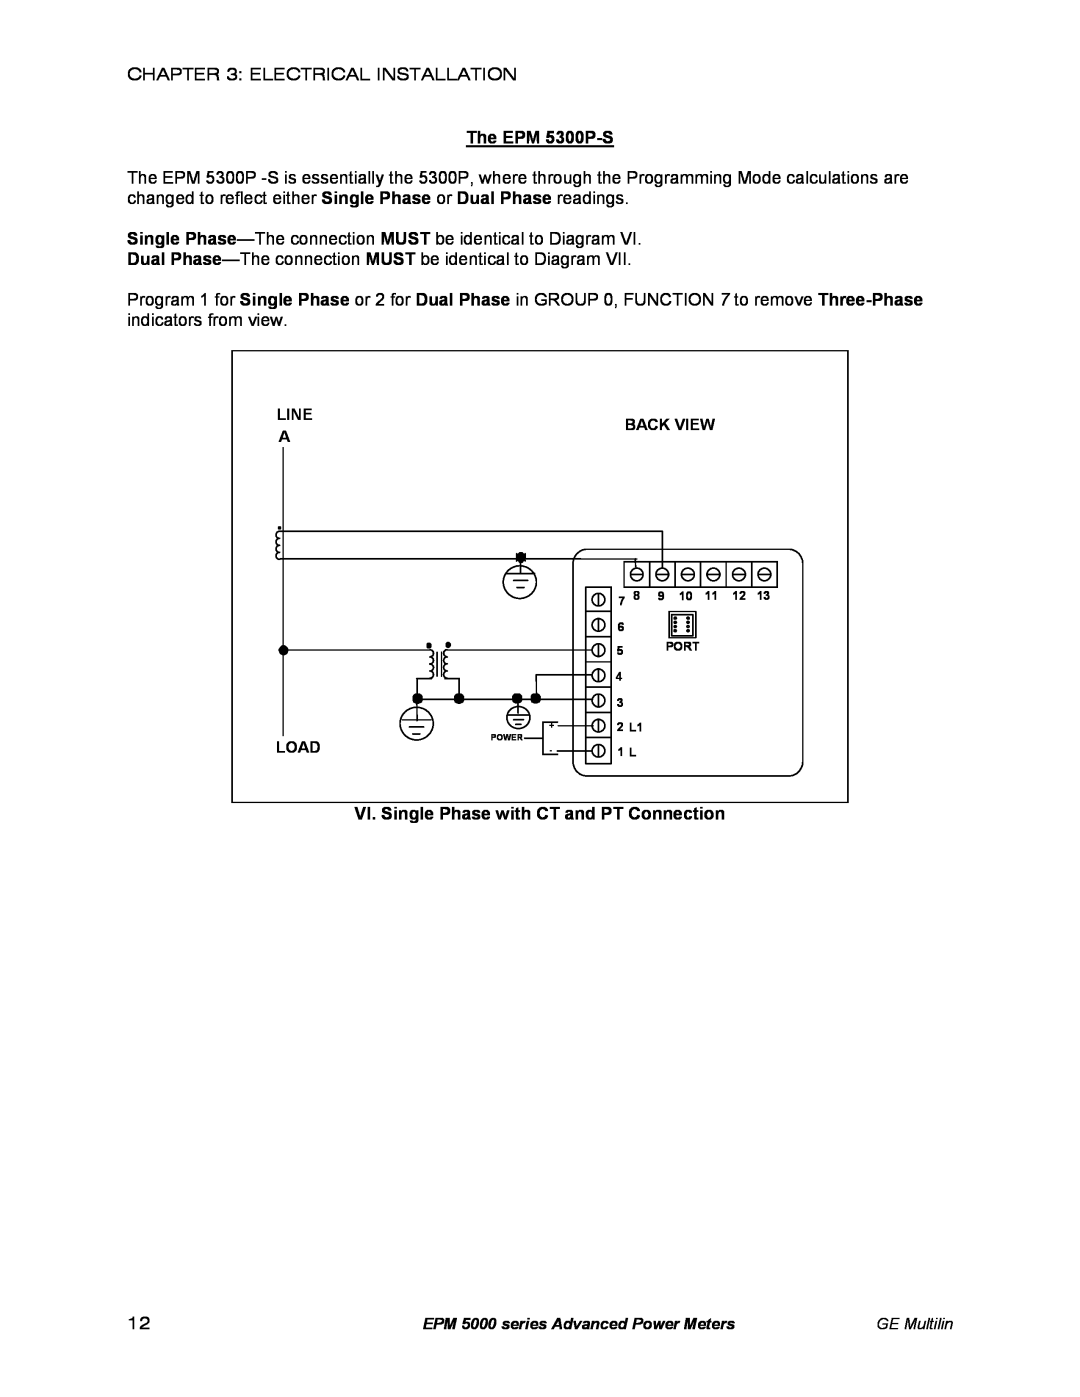 GE EPM 5200, EPM 5350 instruction manual The EPM 5300P-S, VI. Single Phase with CT and PT Connection, Port 